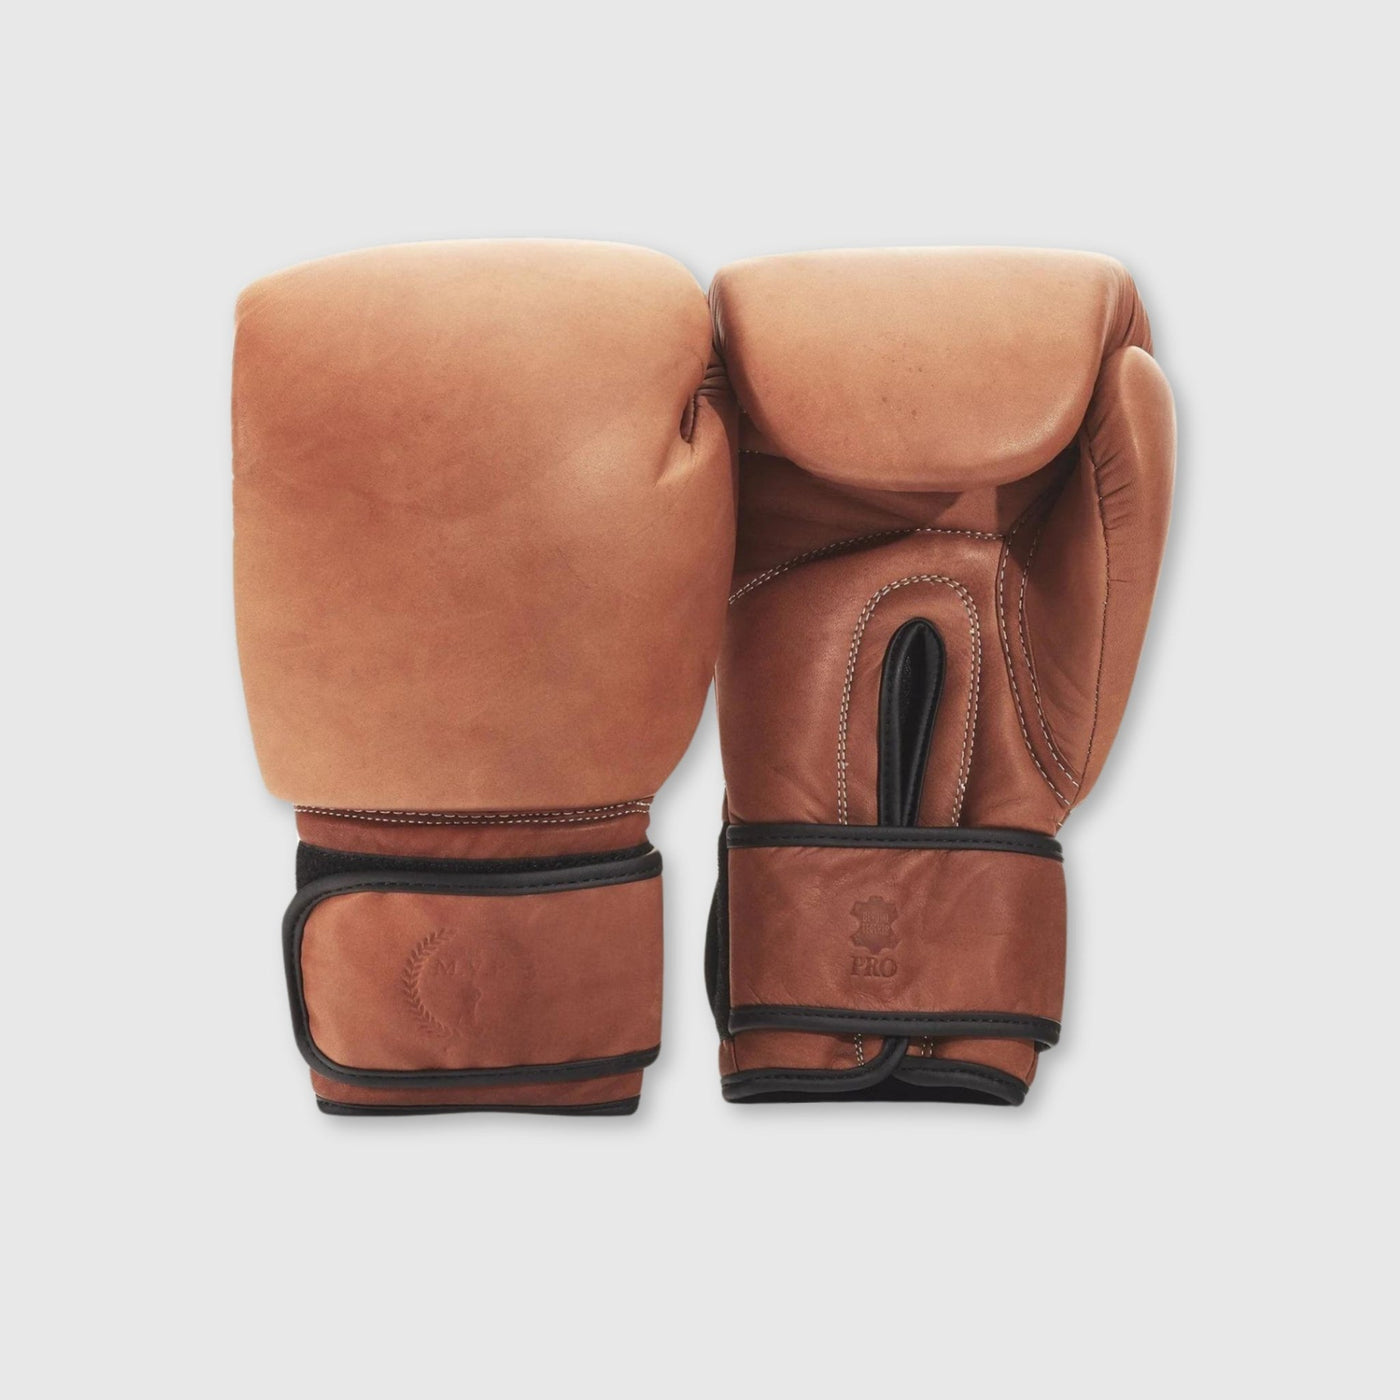 PRO Deluxe Tan Leather Boxing Gloves (Strap Up) - MODEST VINTAGE PLAYER LTD